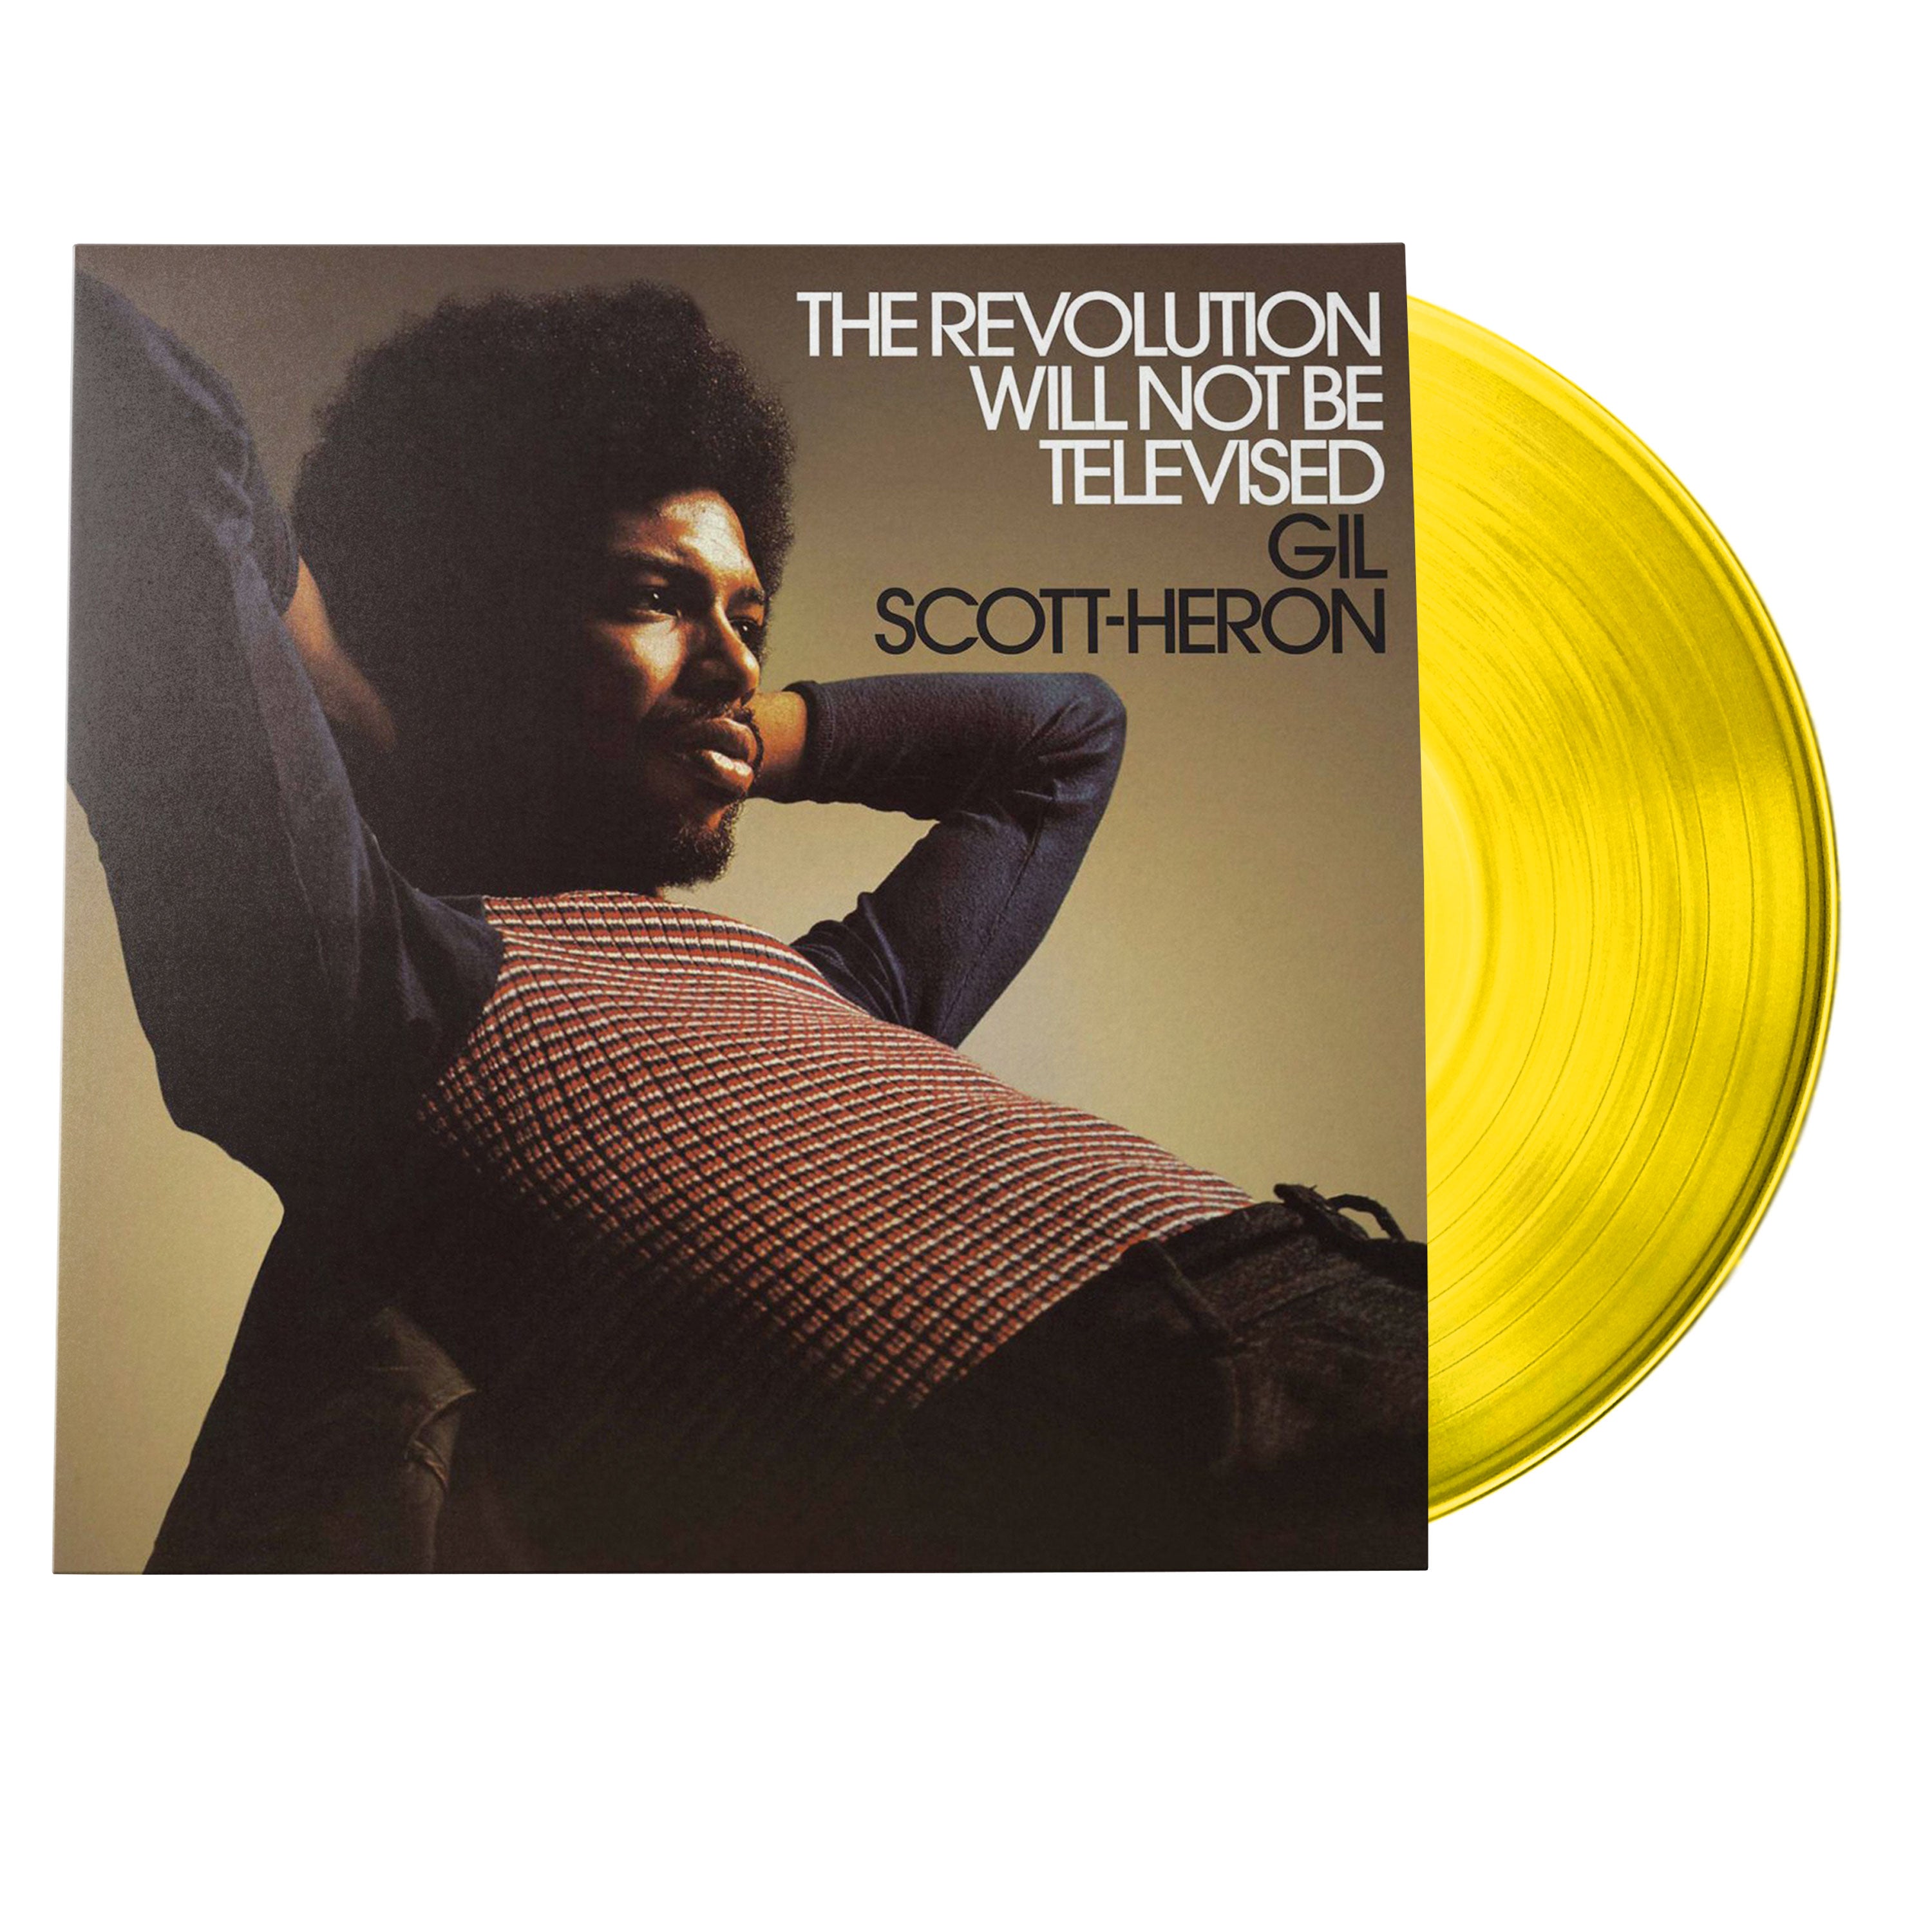 Gil Scott-Heron | The Revolution Will Not Be Televised (Exclusive | Limited Edition | Yellow Vinyl) | Vinyl